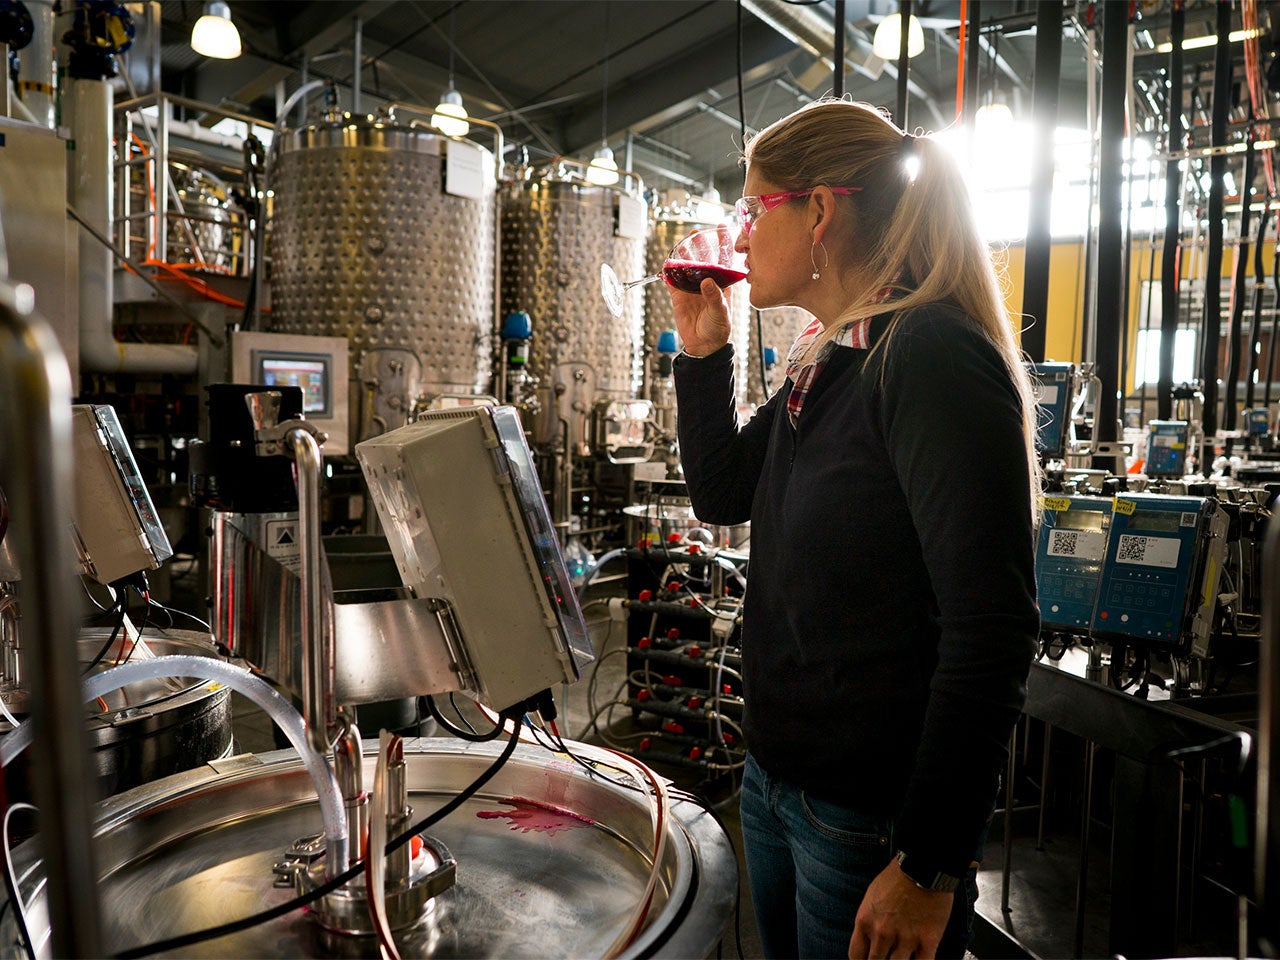 Anita, surrounded by metallic fermentation tanks and wearing safety goggles, tastes red wine from a wine glass.